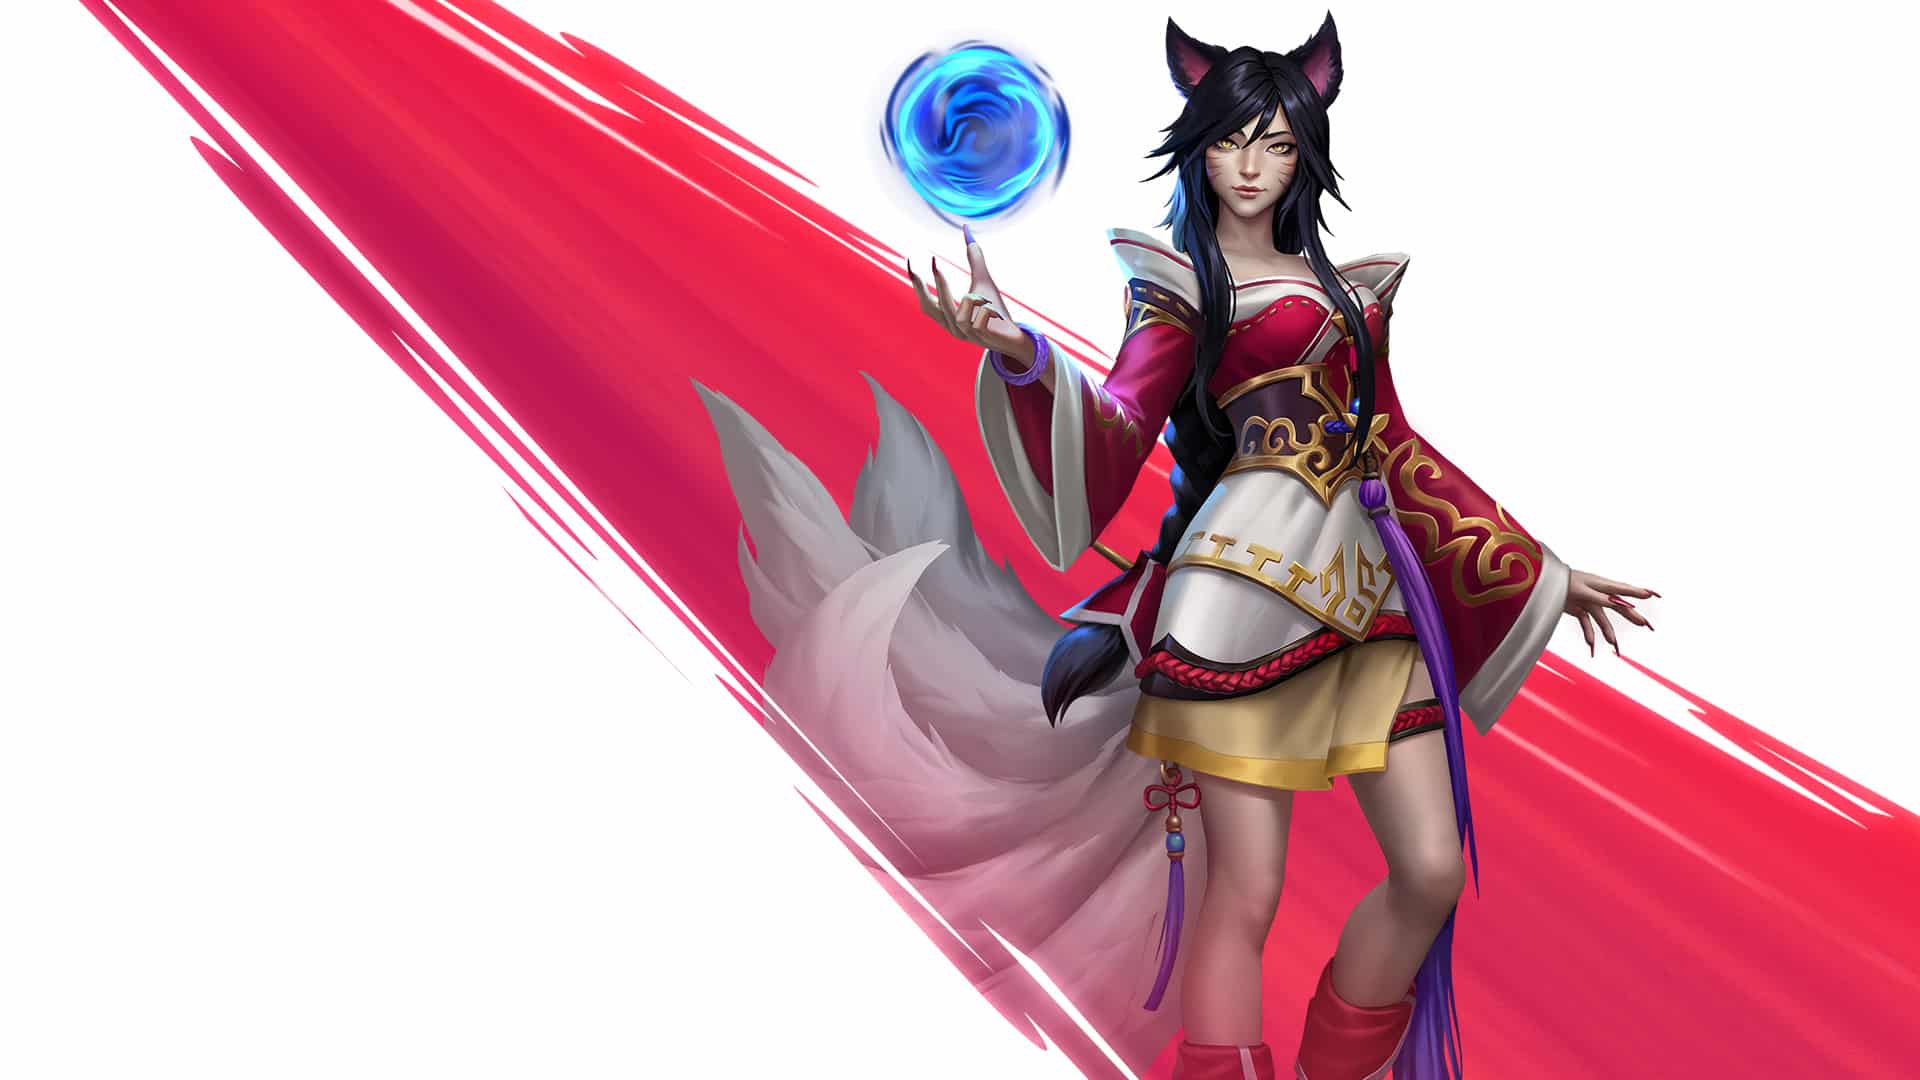 Learn more about Ahri's backstory and abilities in the official League of Legends universe.
3. Ahri - Leaguepedia - wide 4